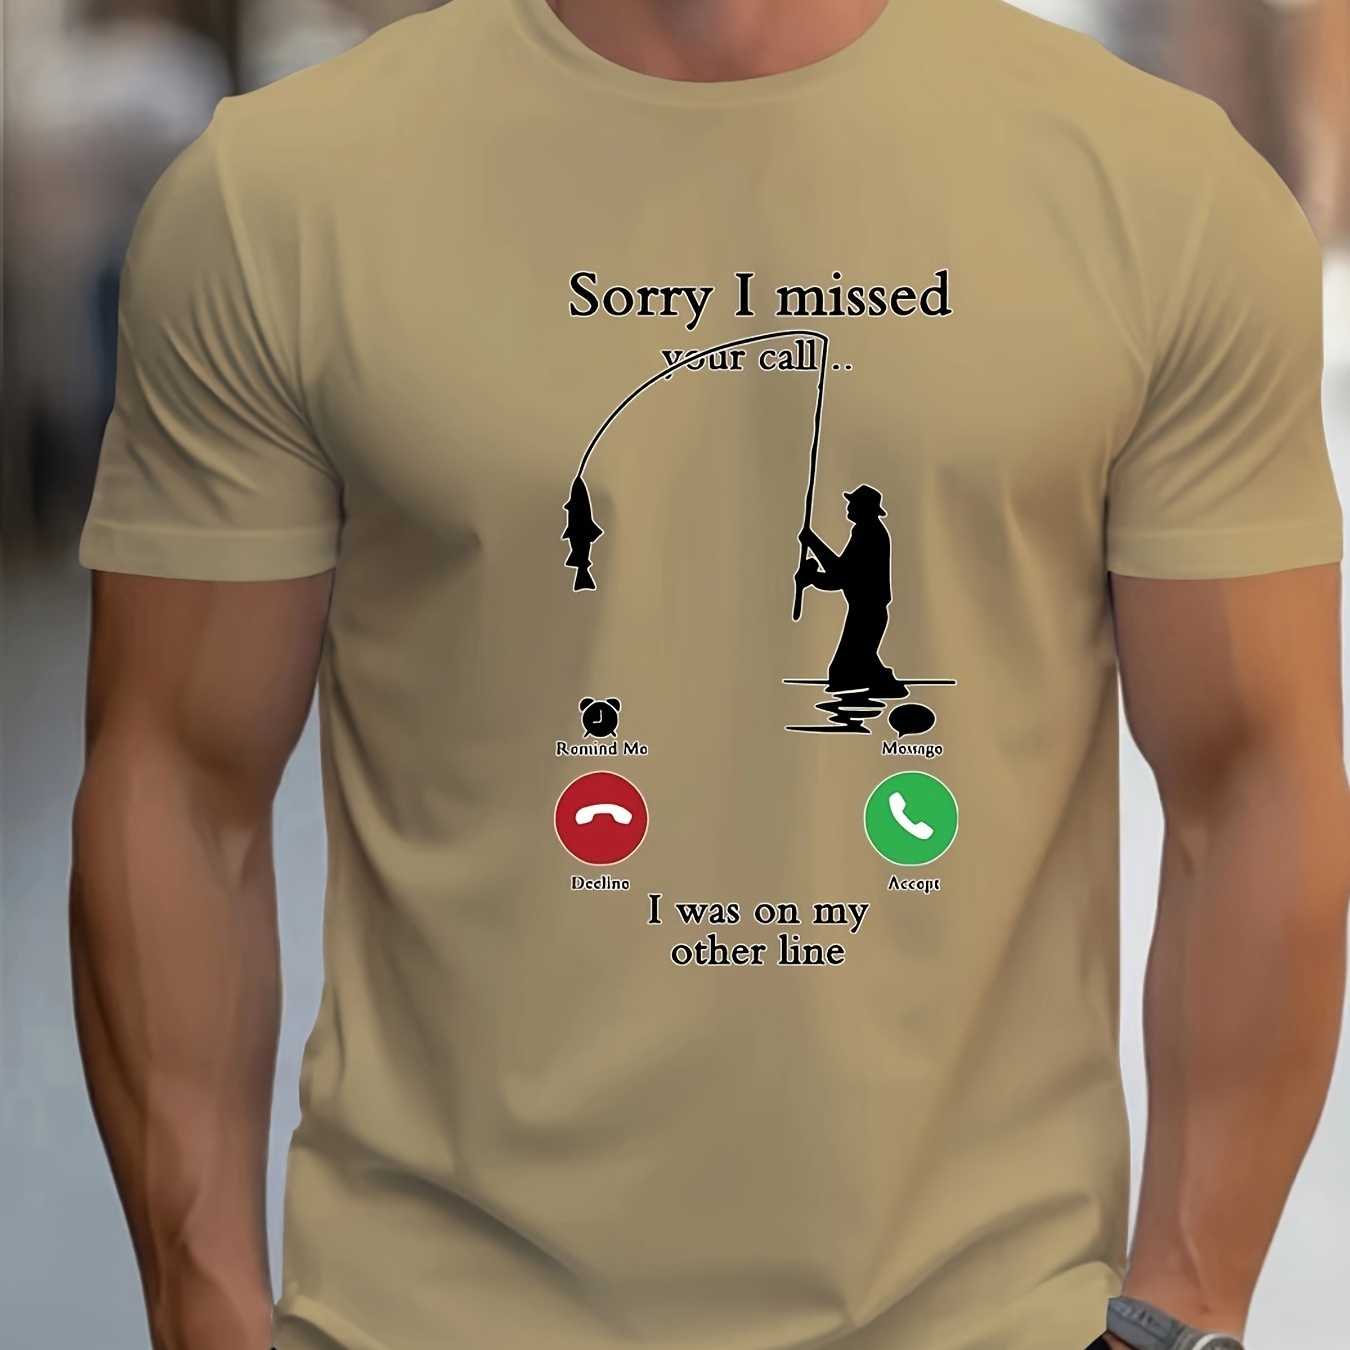 

Sorry I Missed Your Call Print Short Sleeve Tees For Men, Casual Crew Neck T-shirt, Comfortable Breathable T-shirt